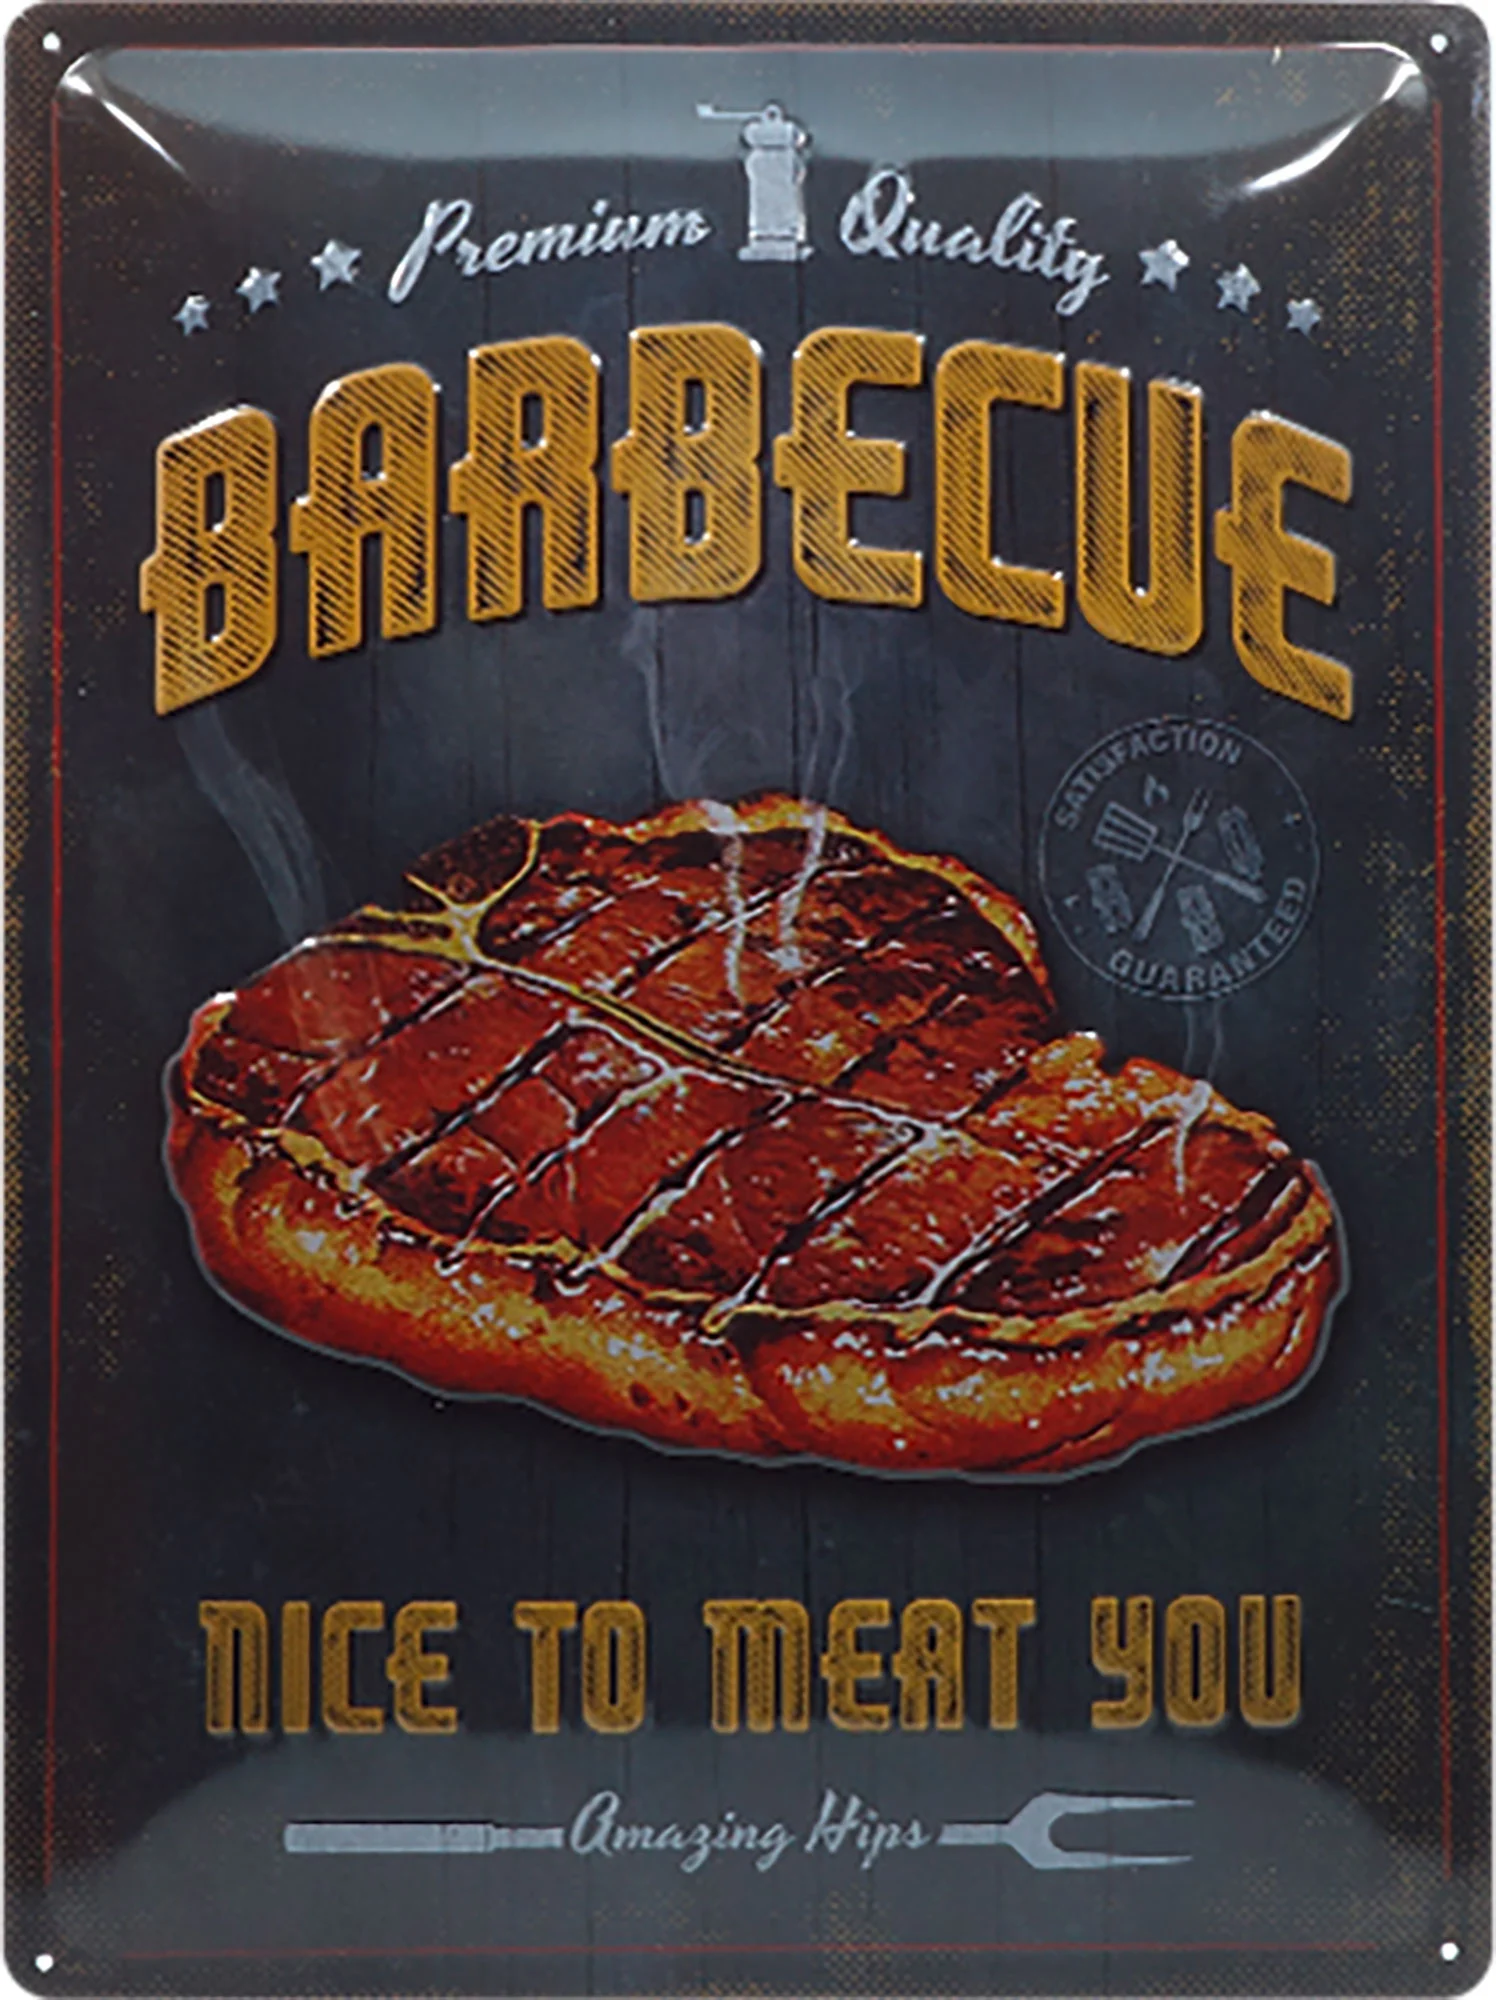 *BARBECUE* METAL SIGN